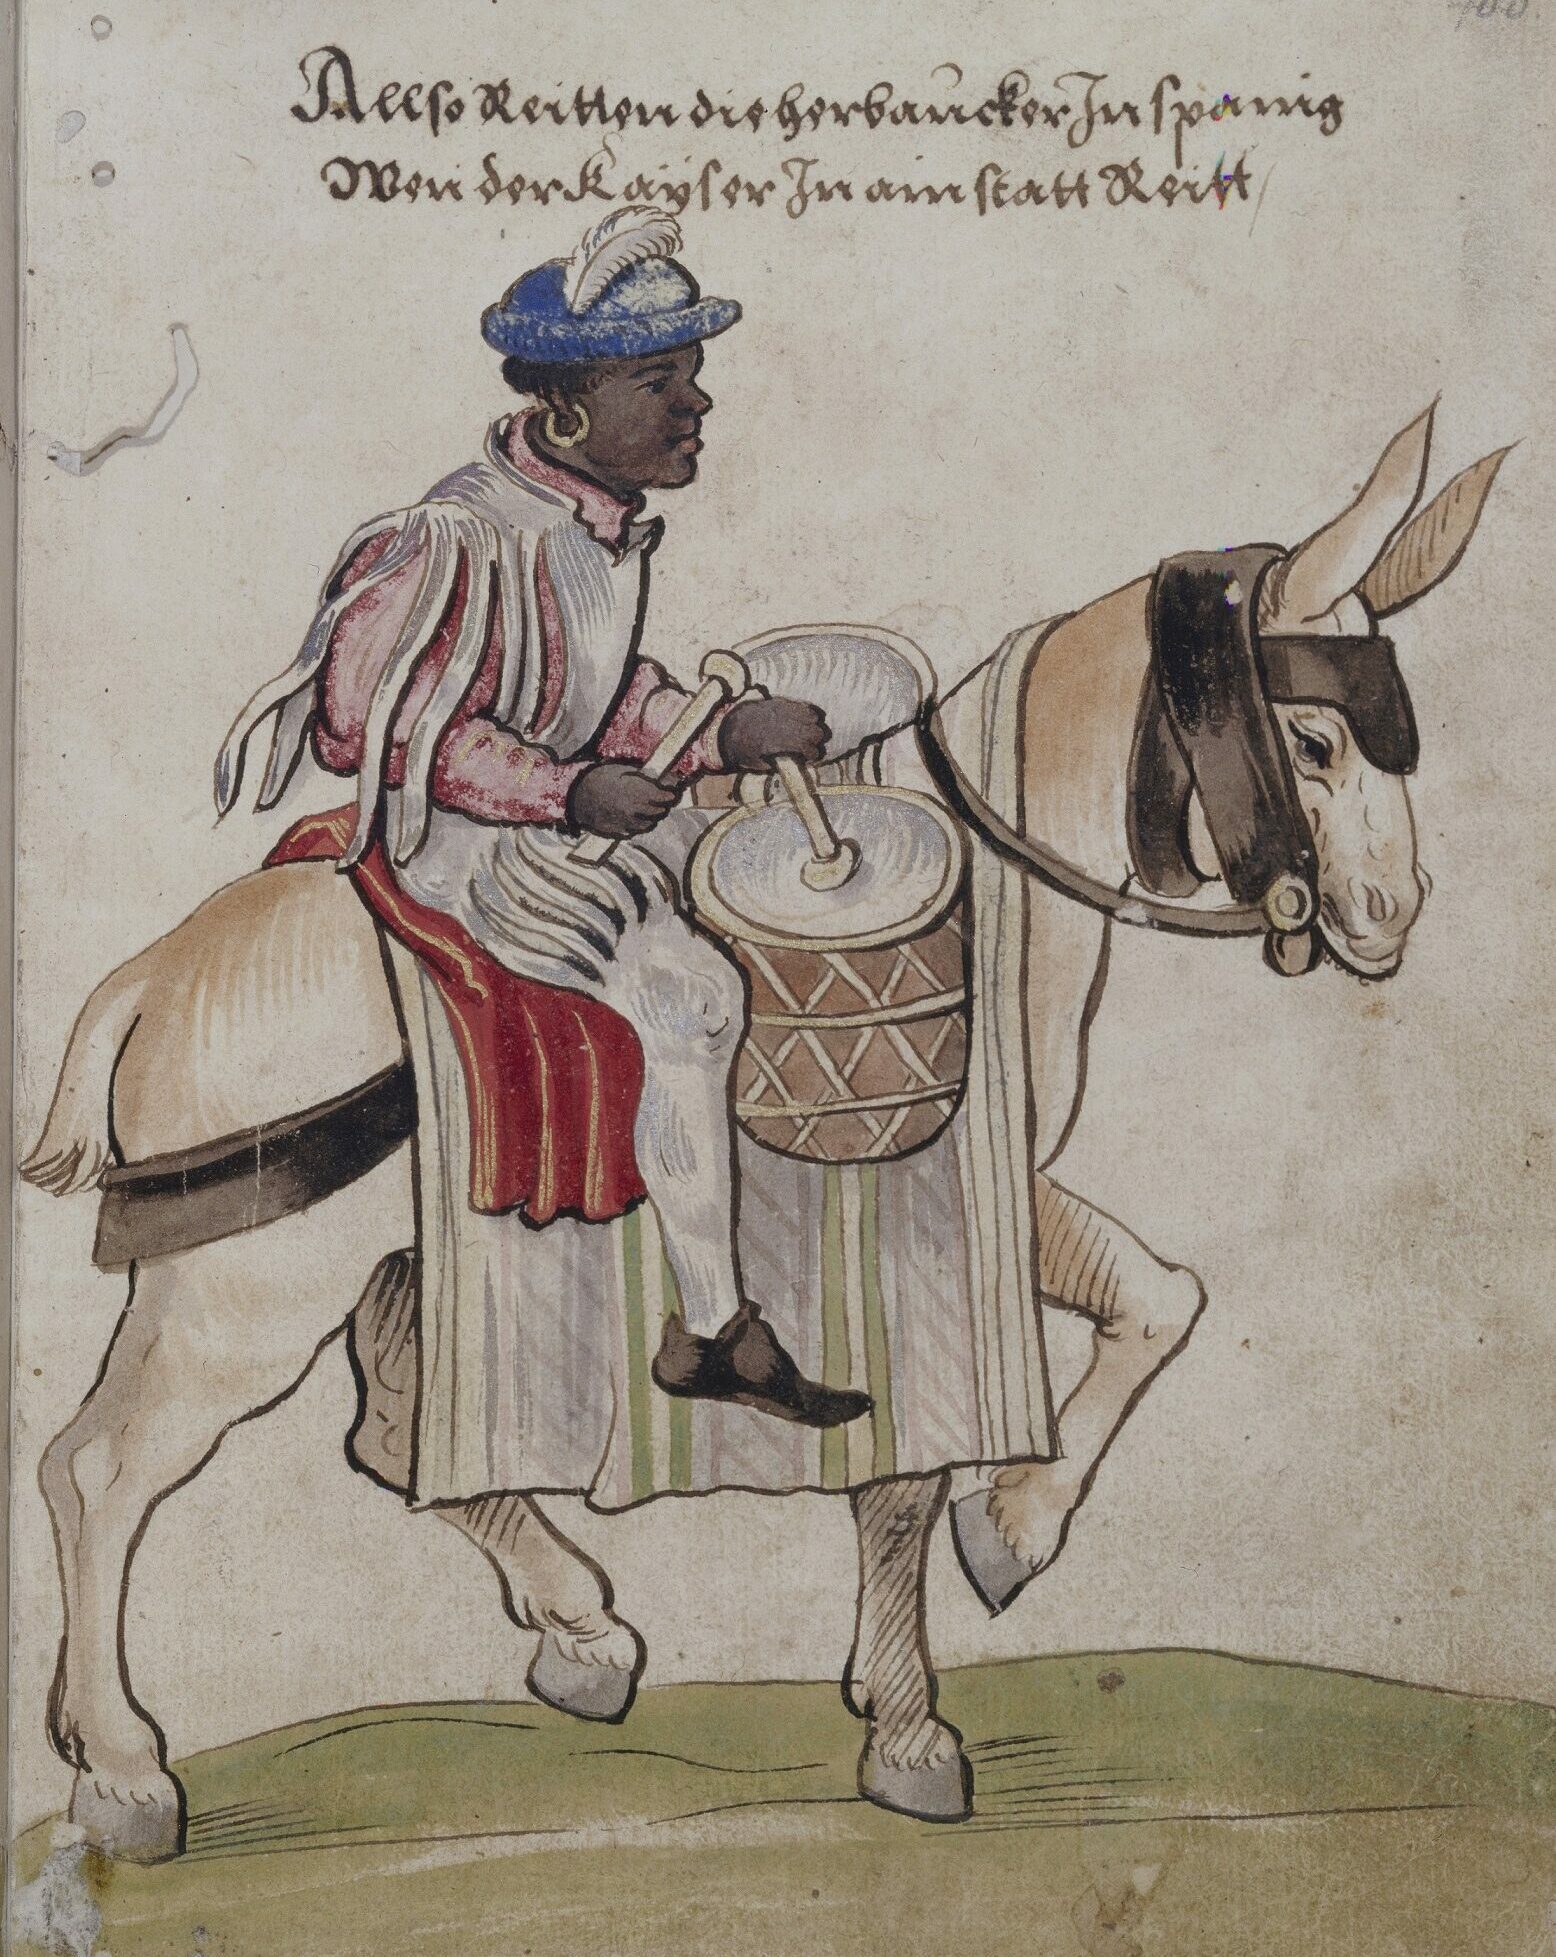 An archive illustration of a Black man sitting on a horse drumming a tabor drum